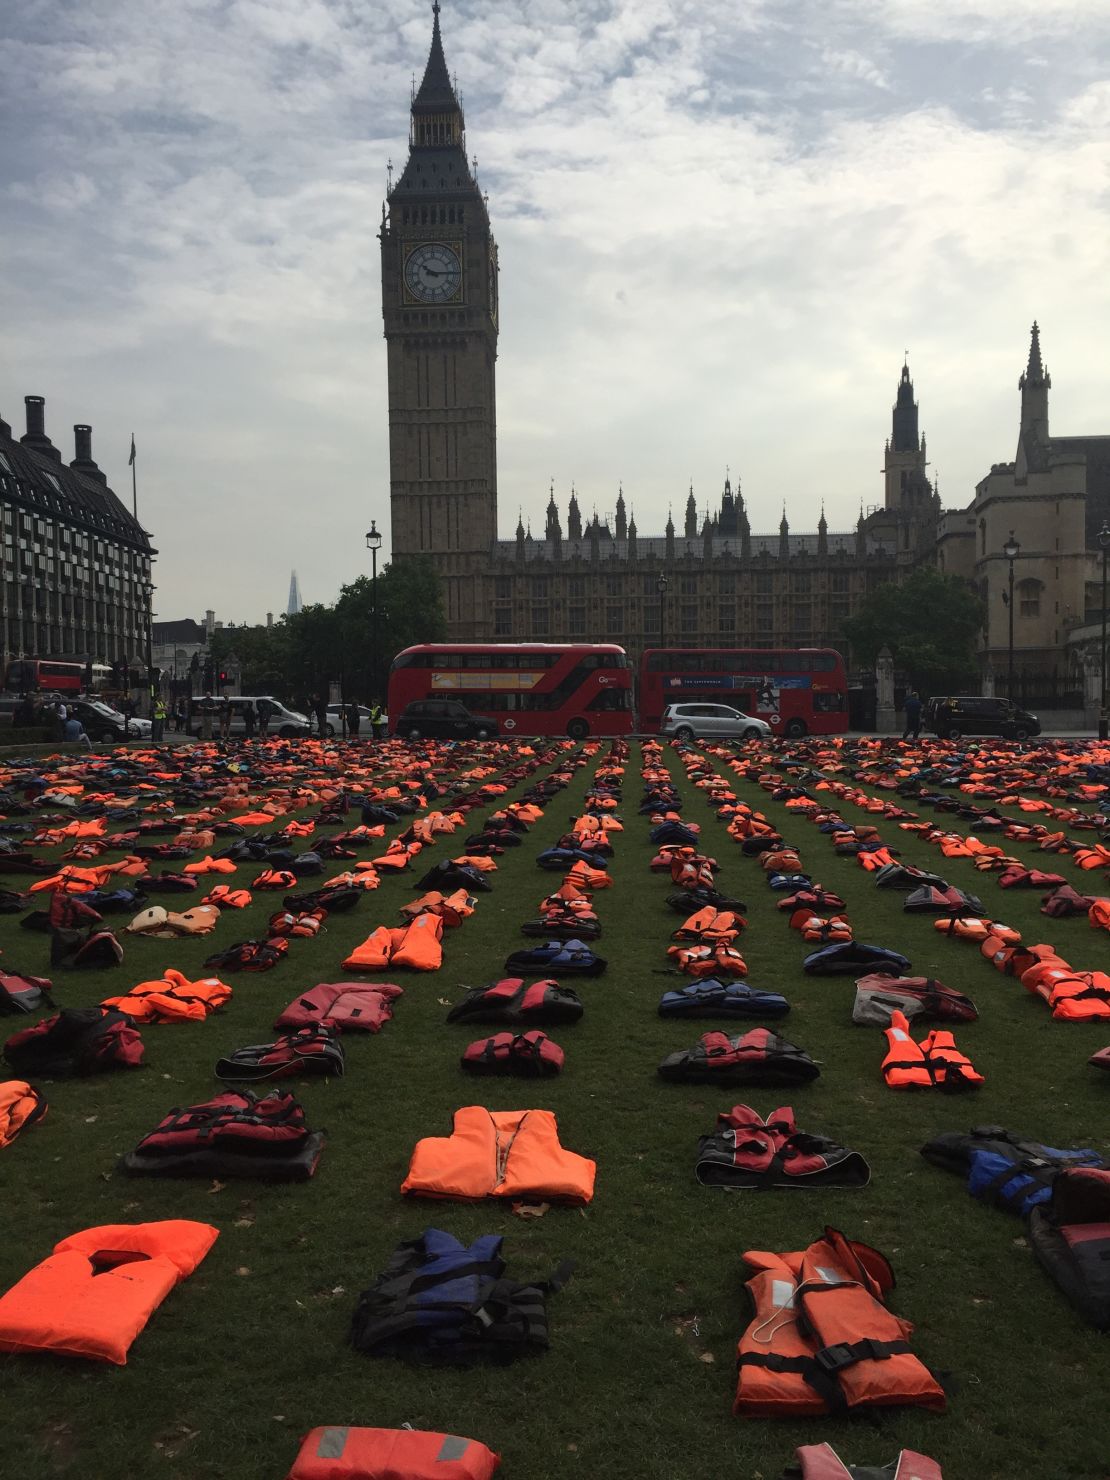 2500 lifejackets were on display in London.